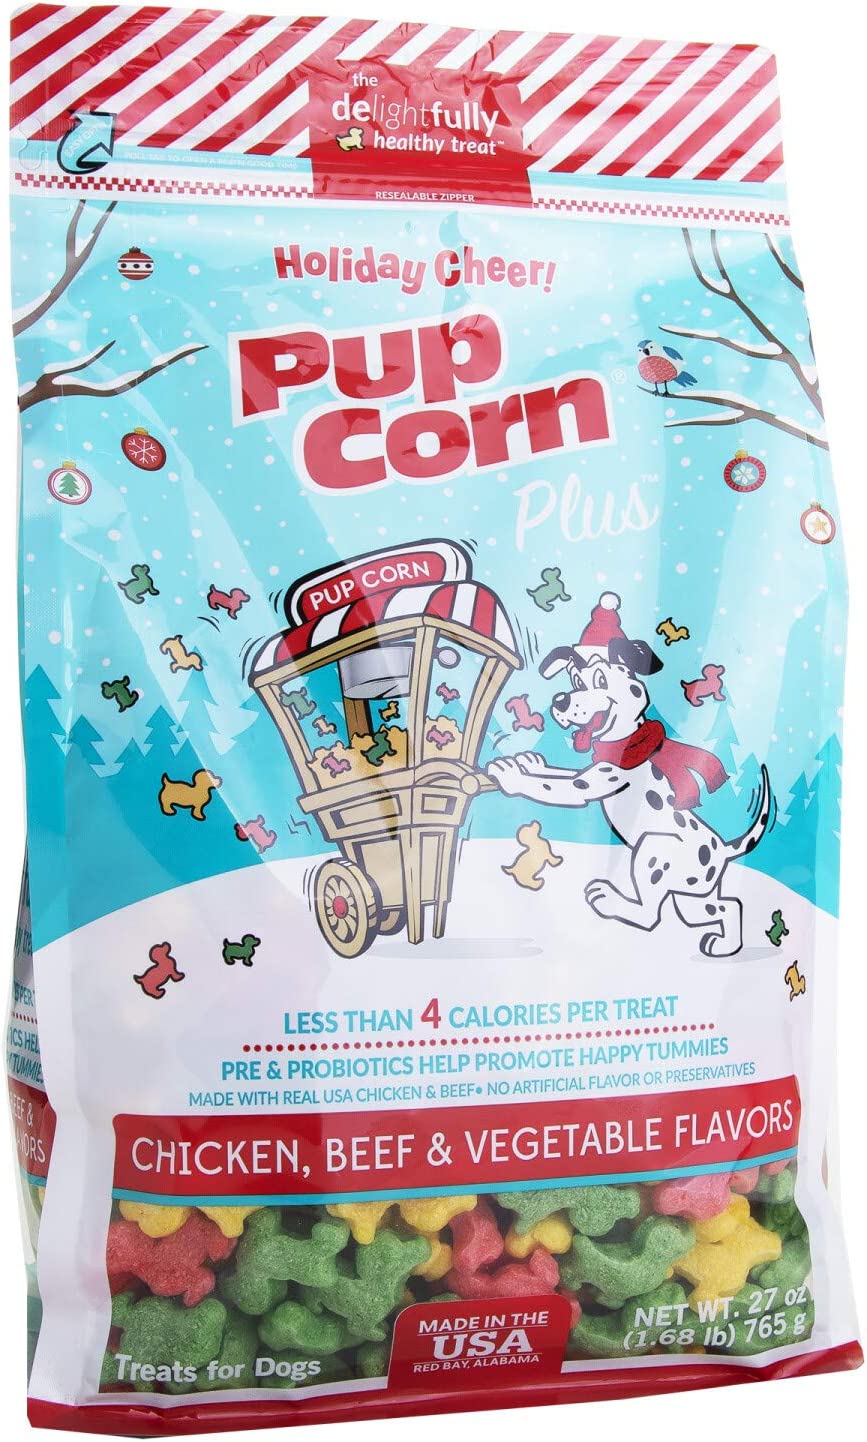 Pup Corn Plus Holiday Cheer - Chicken Beef and Vegetable Flavors Home Good